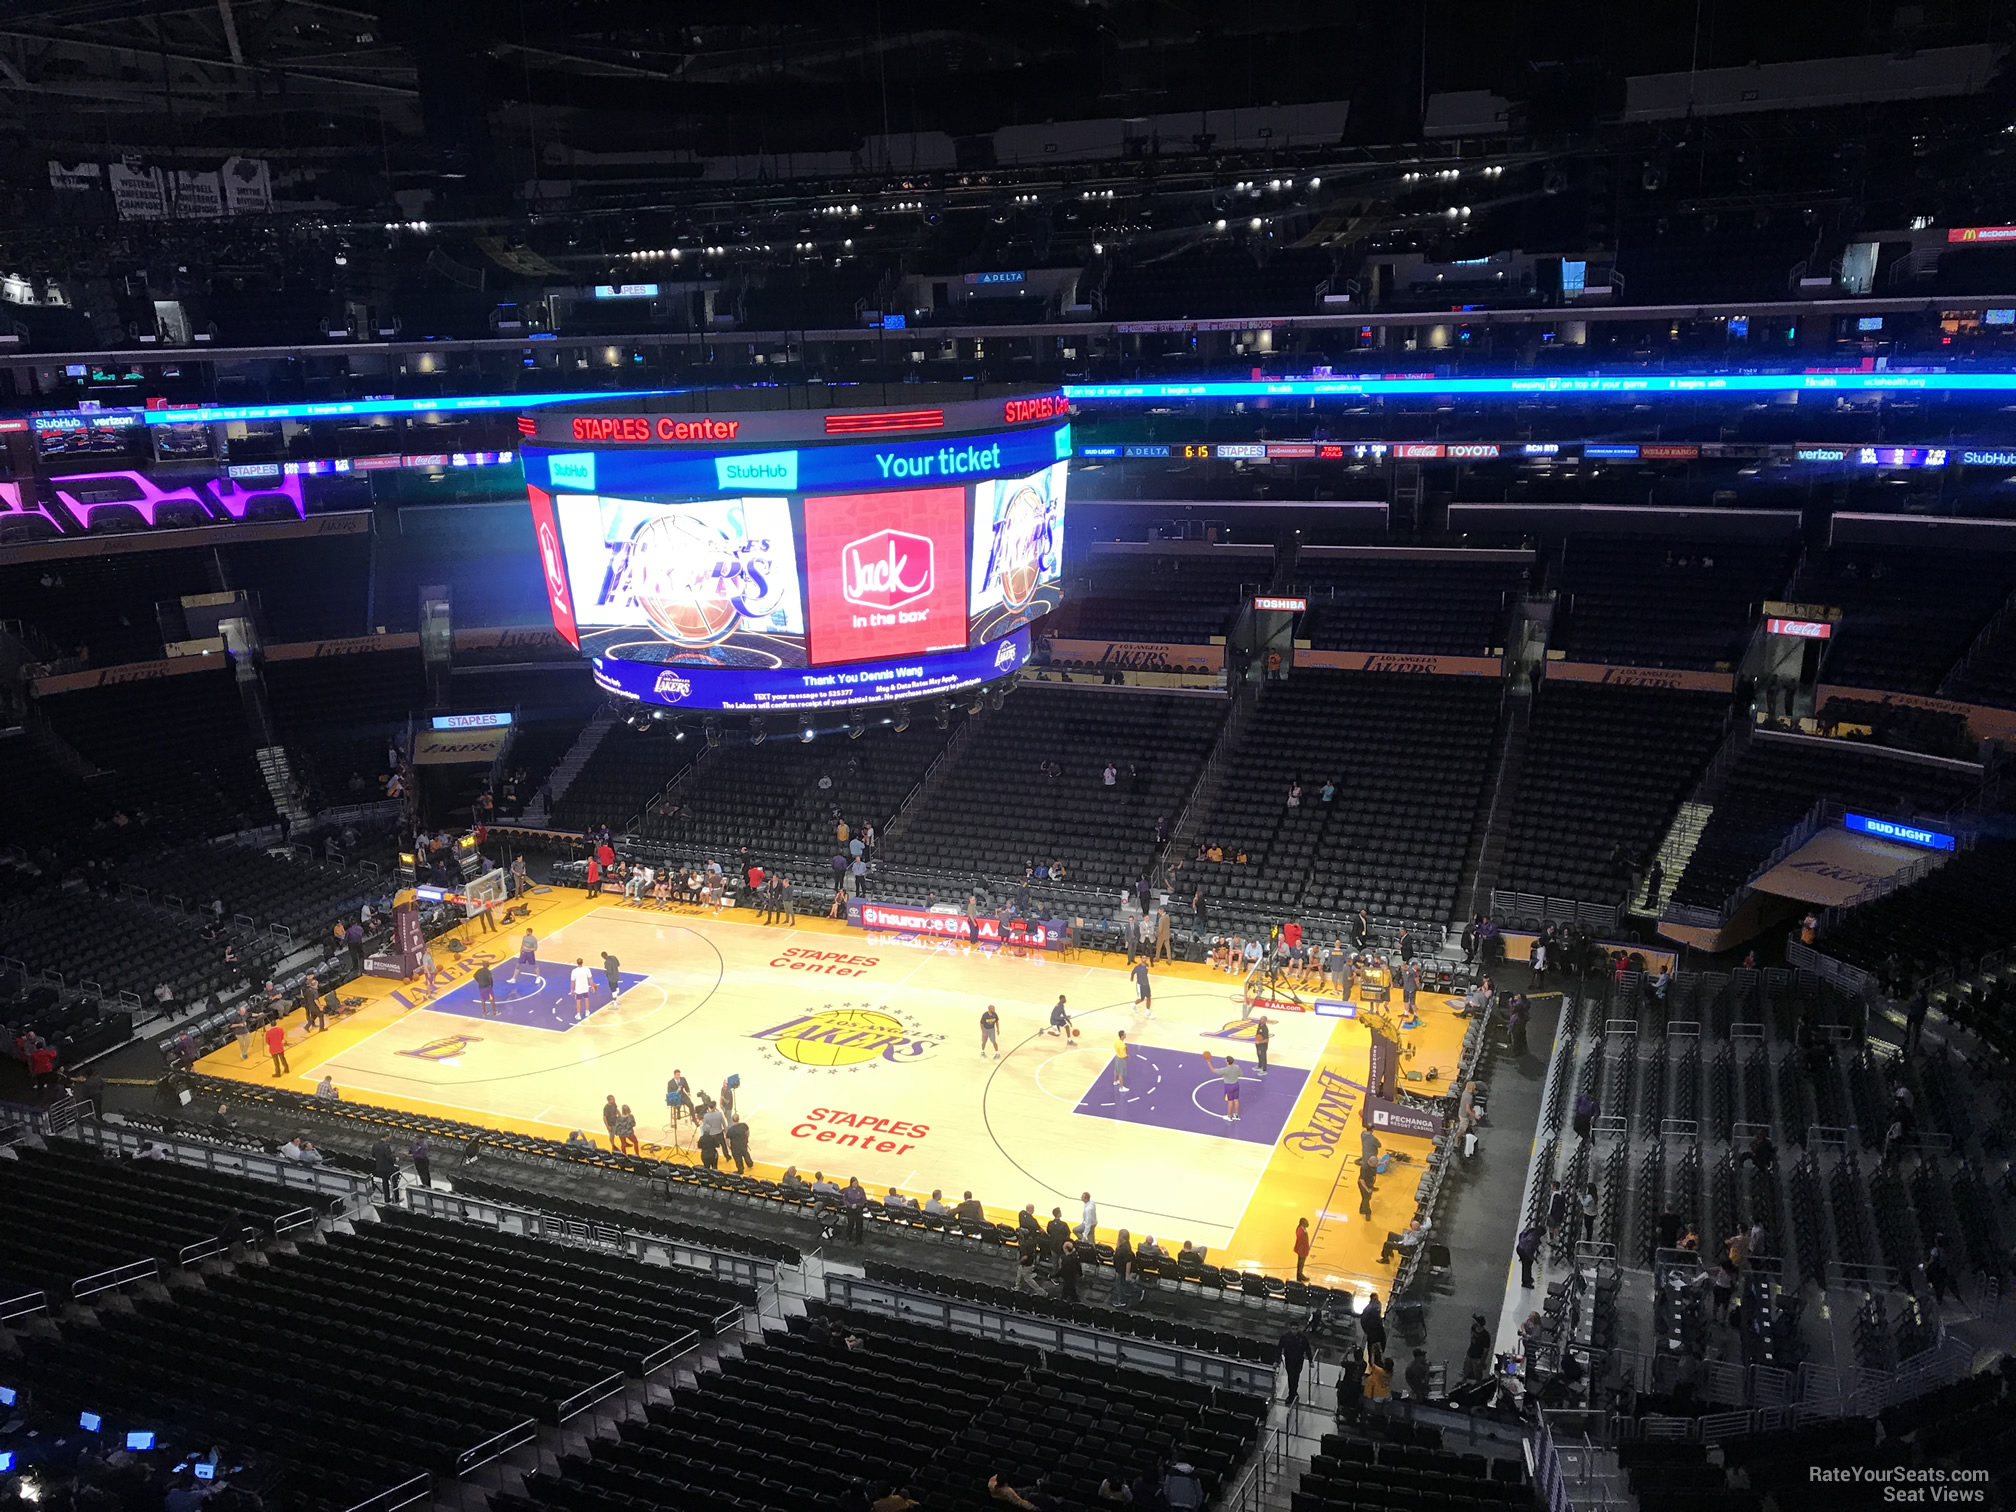 Staples Center Section 316 - Clippers/Lakers - RateYourSeats.com